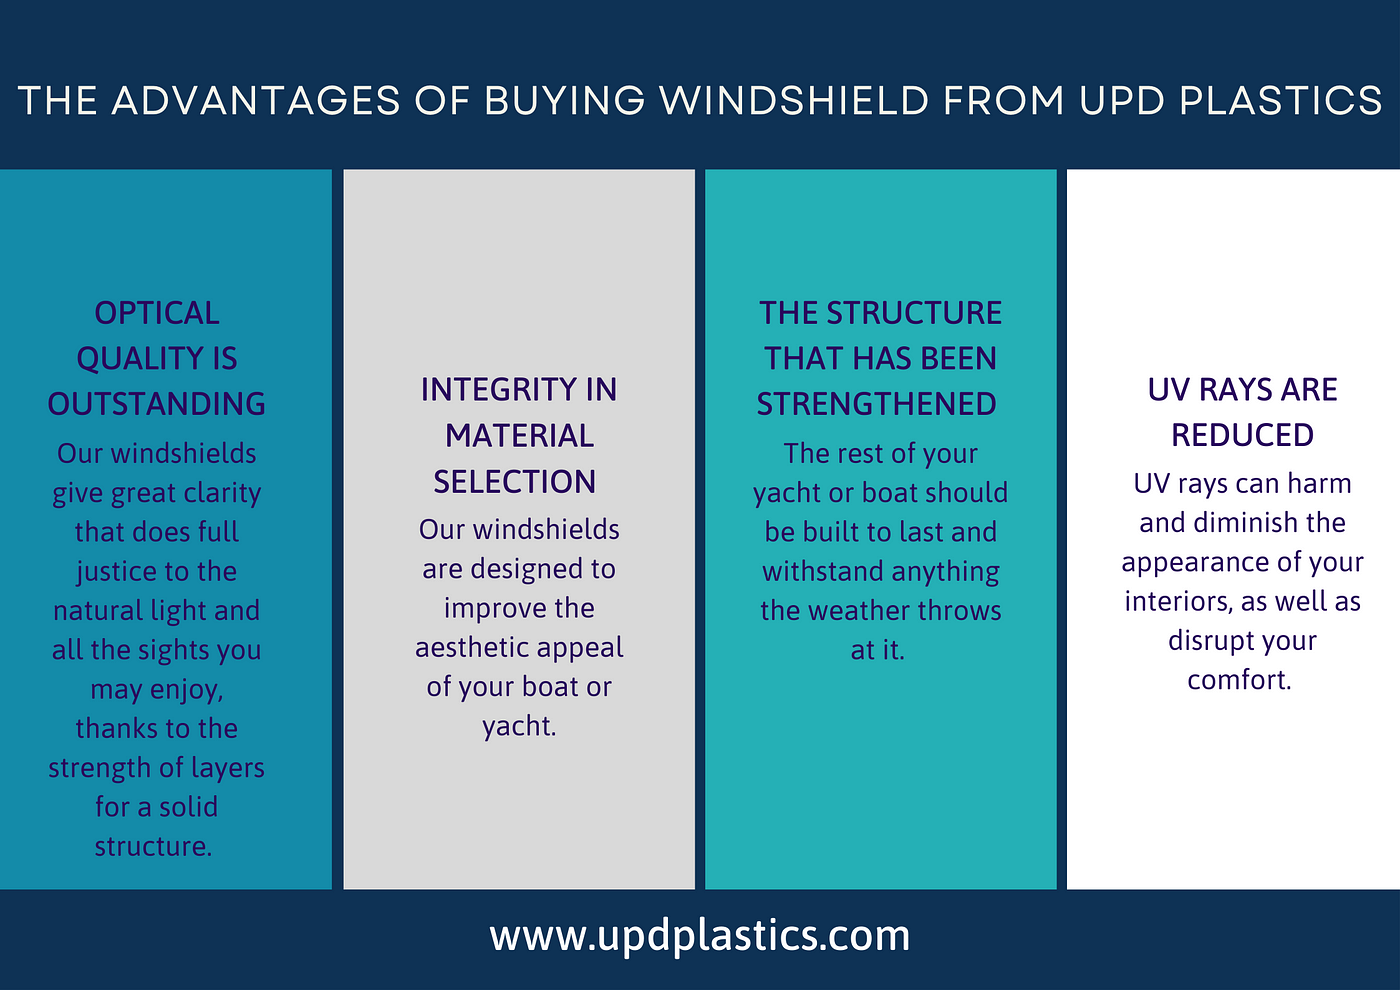 Why Do You Need To Replace Your Boat Windshield?, by Upd Plastics